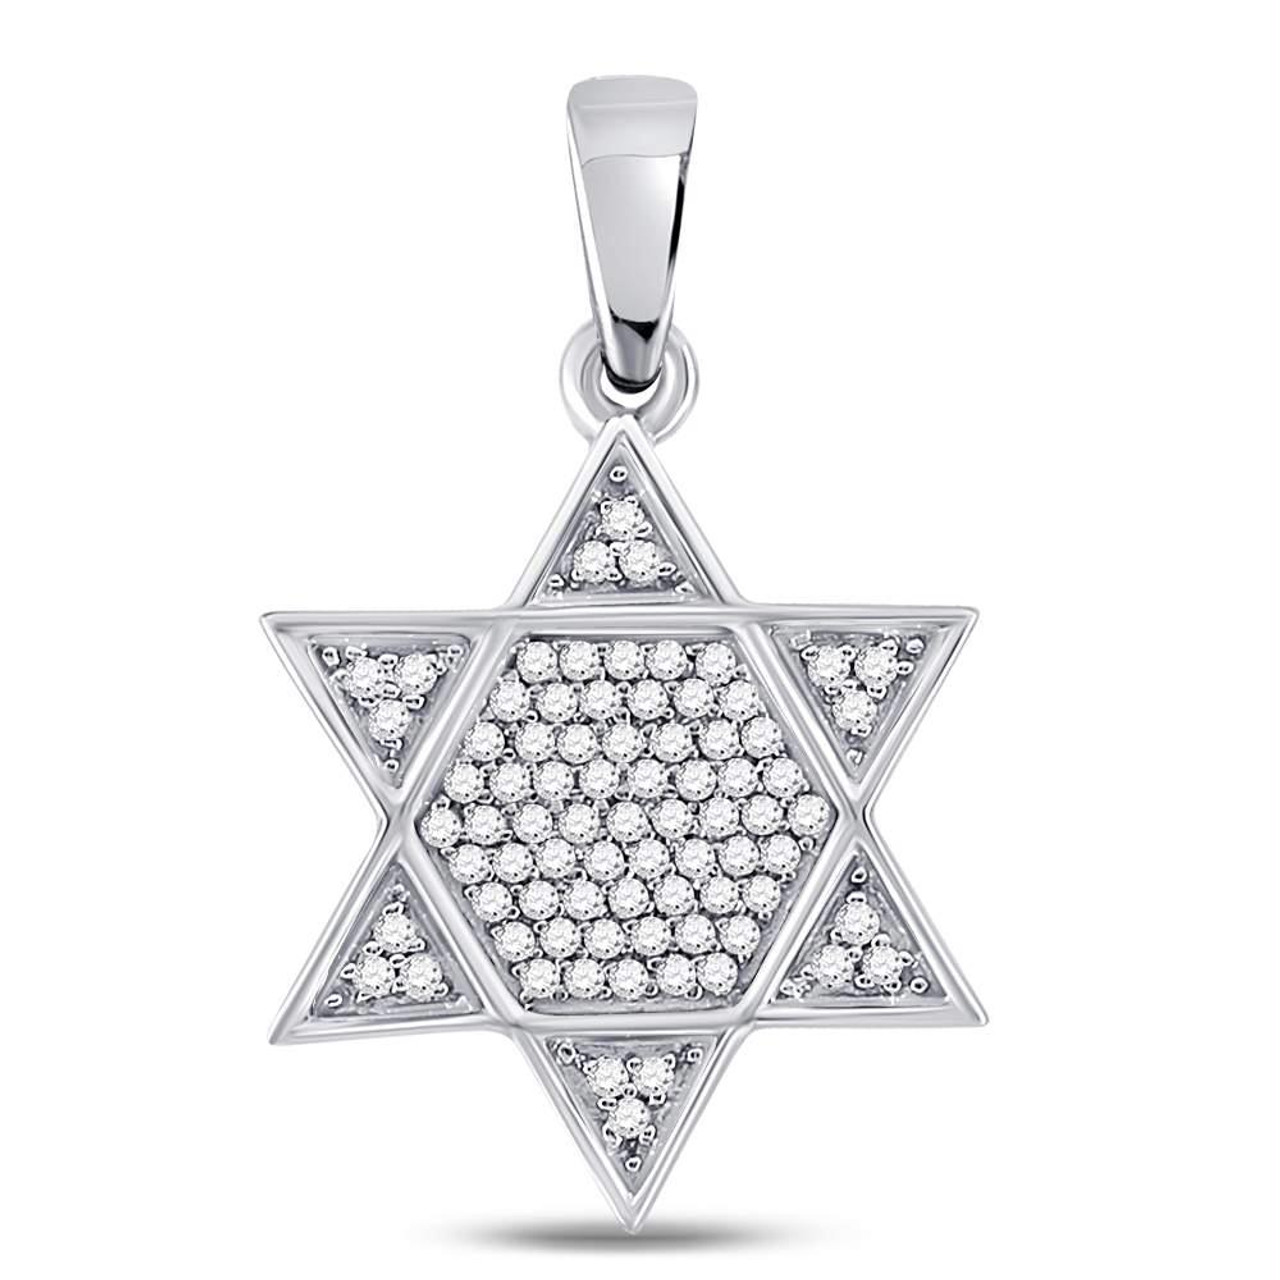 Pendant “Magen David” of Blue Porcelain – Yoffi ‒ The Flavor of Israel.  Unique Gifts from Israel